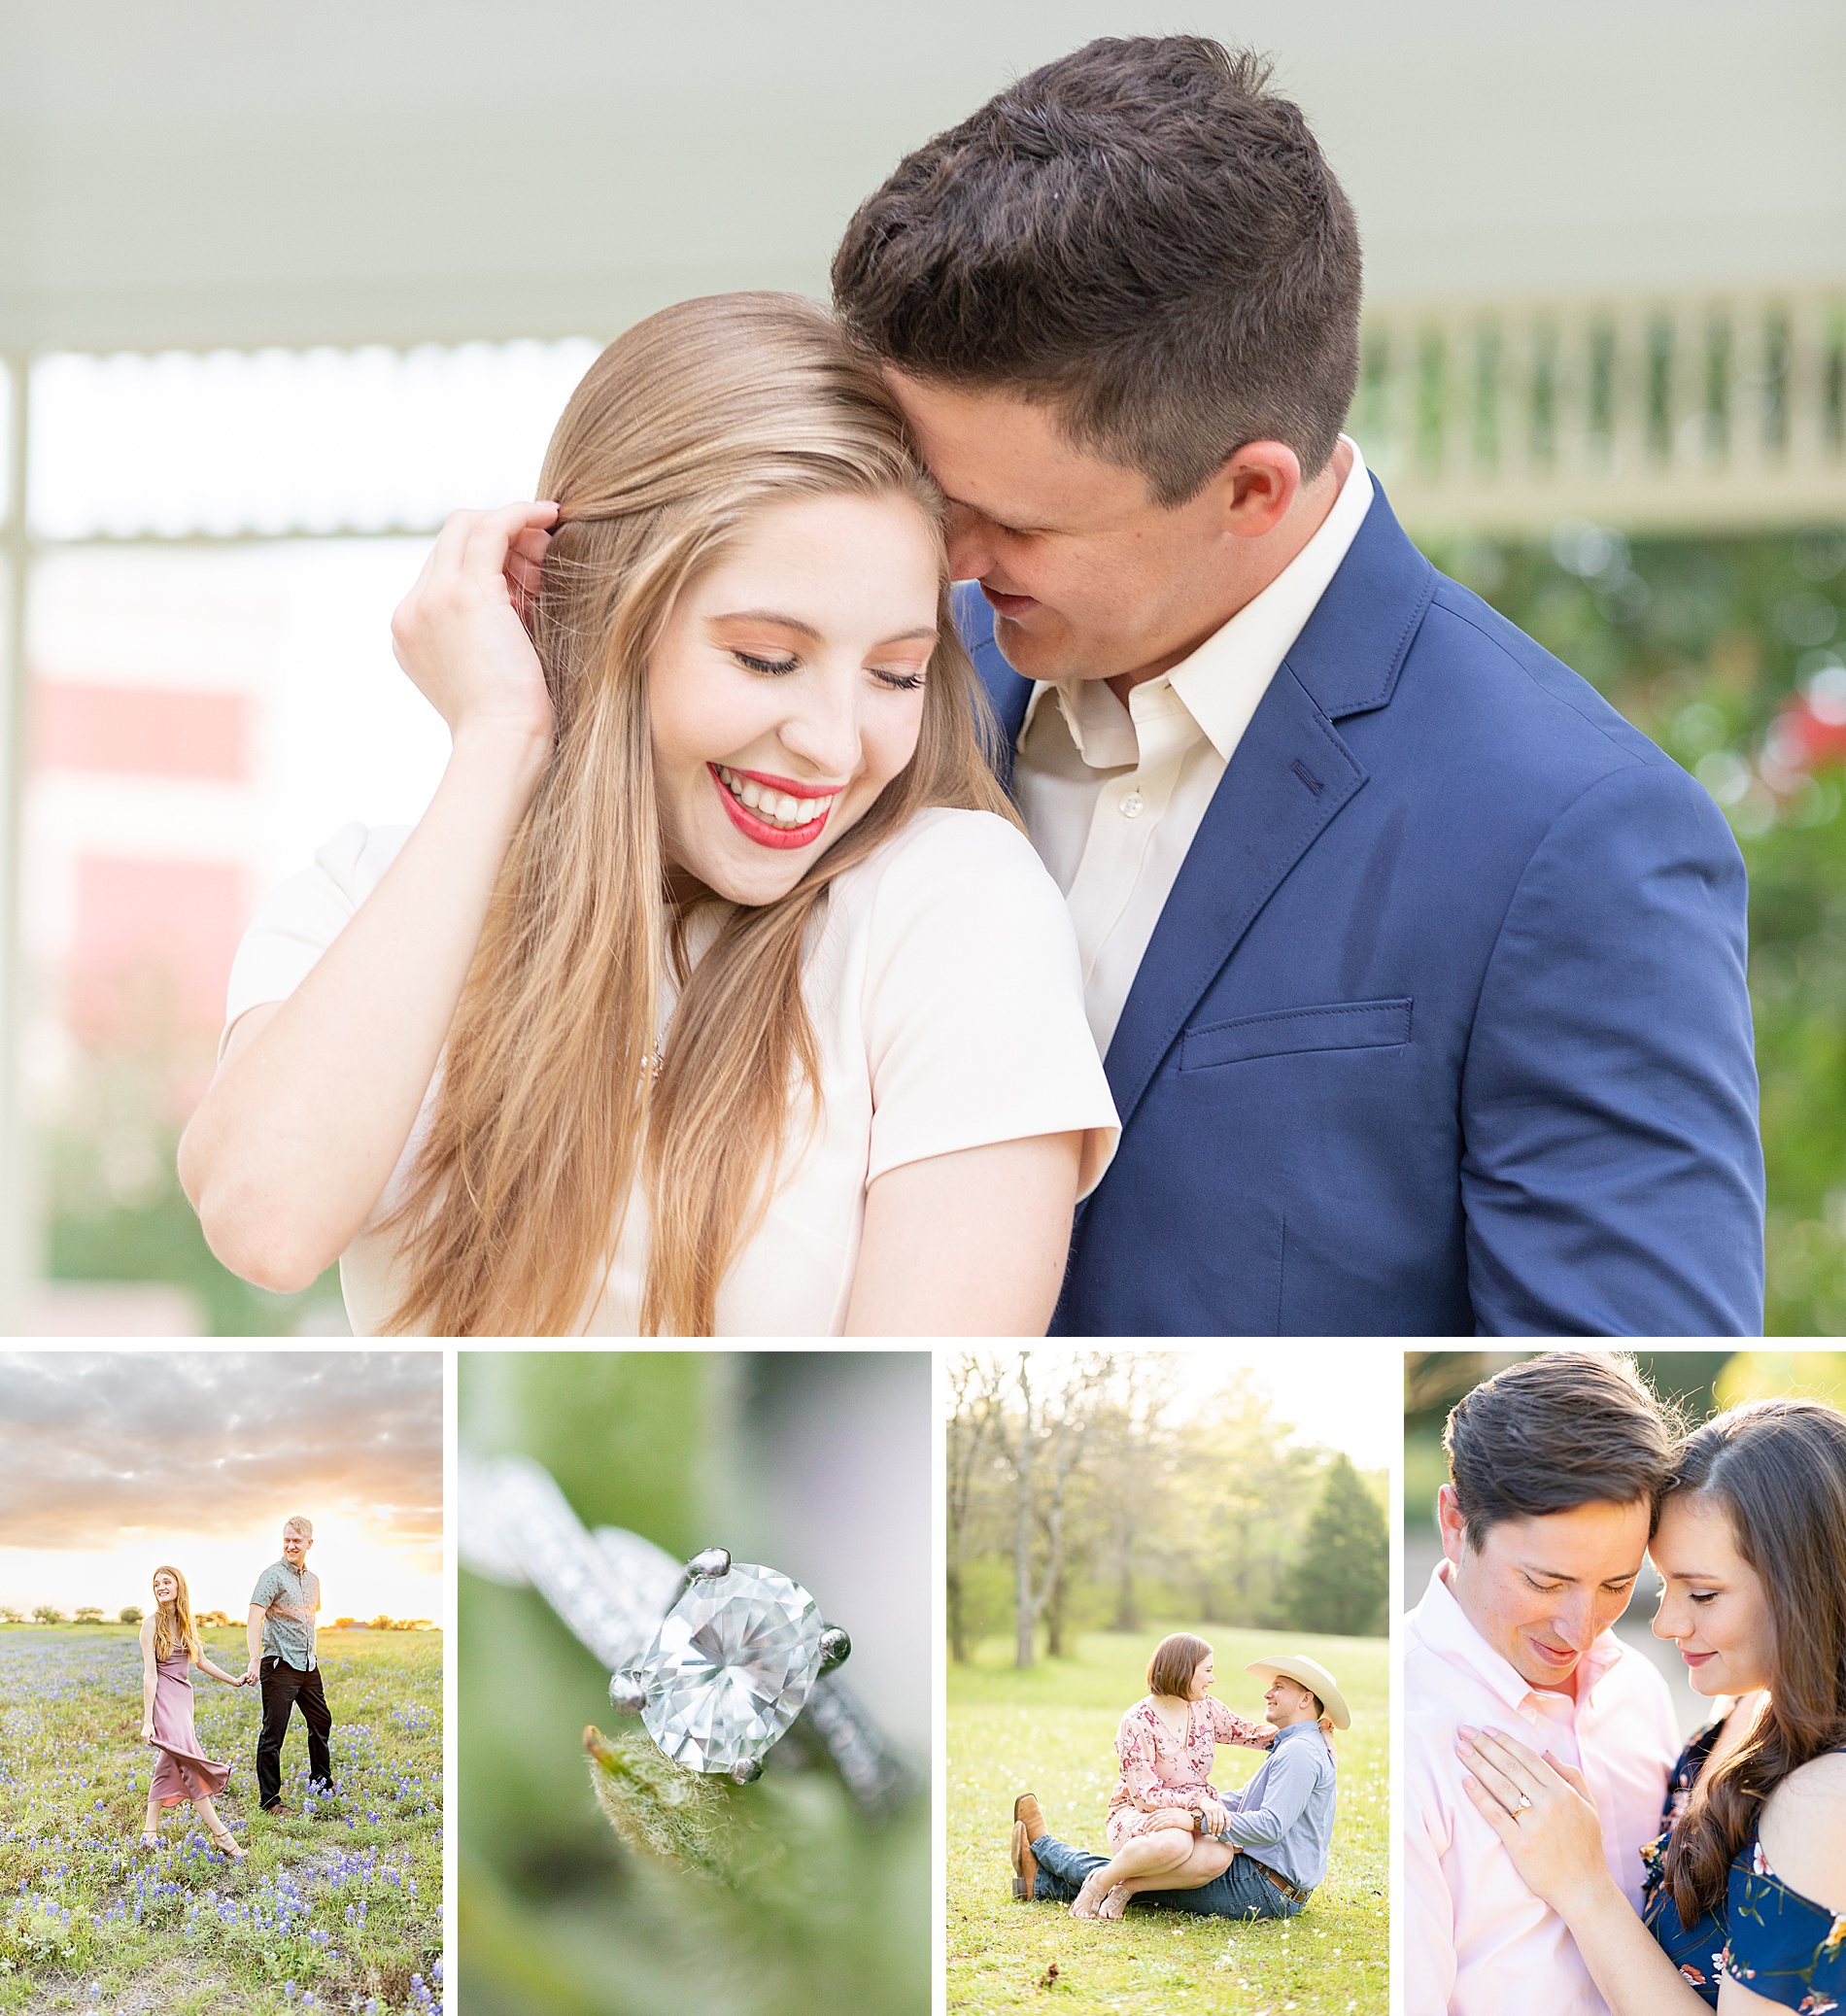 Preparing for Your Engagement Session by South Carolina wedding photographer